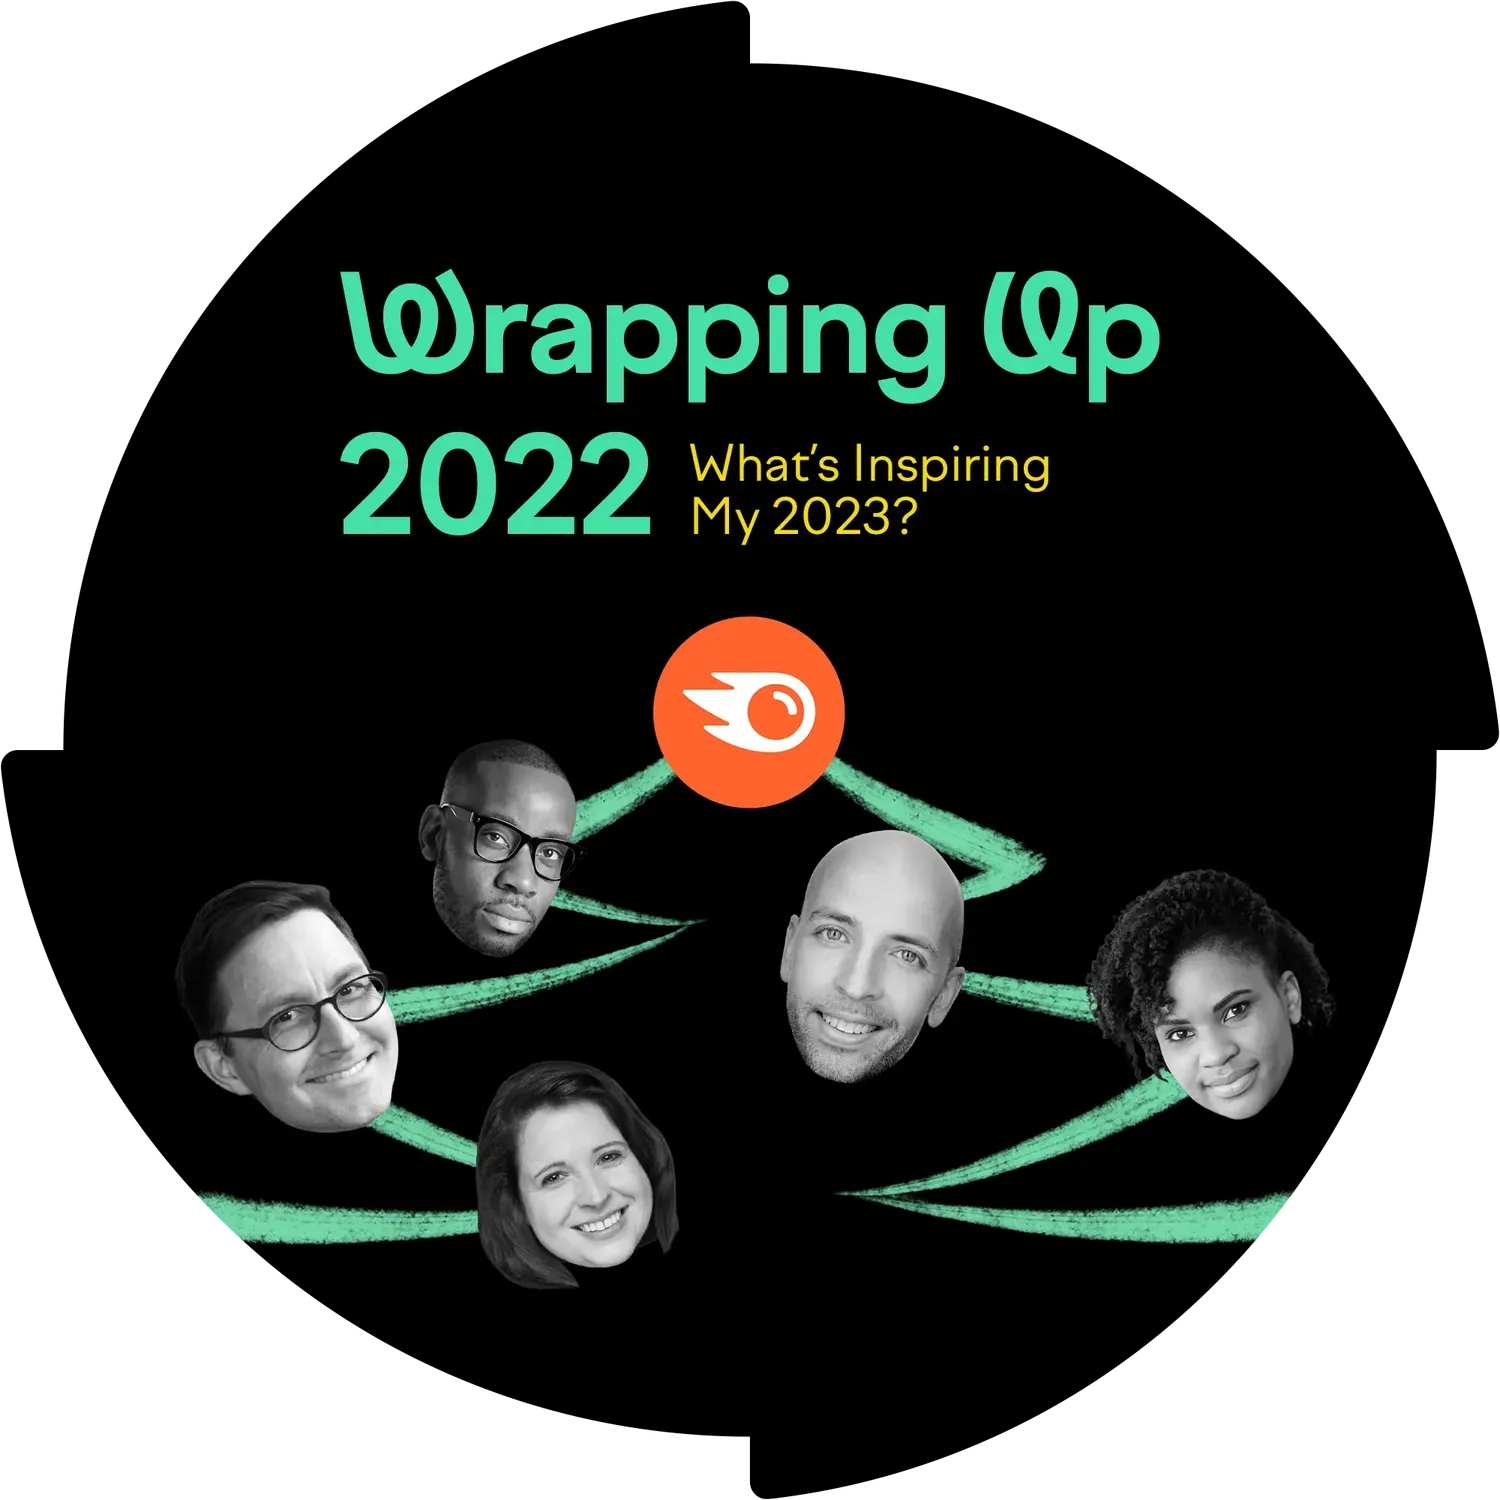 Wrapping Up 2022: What’s Inspiring My 2023?